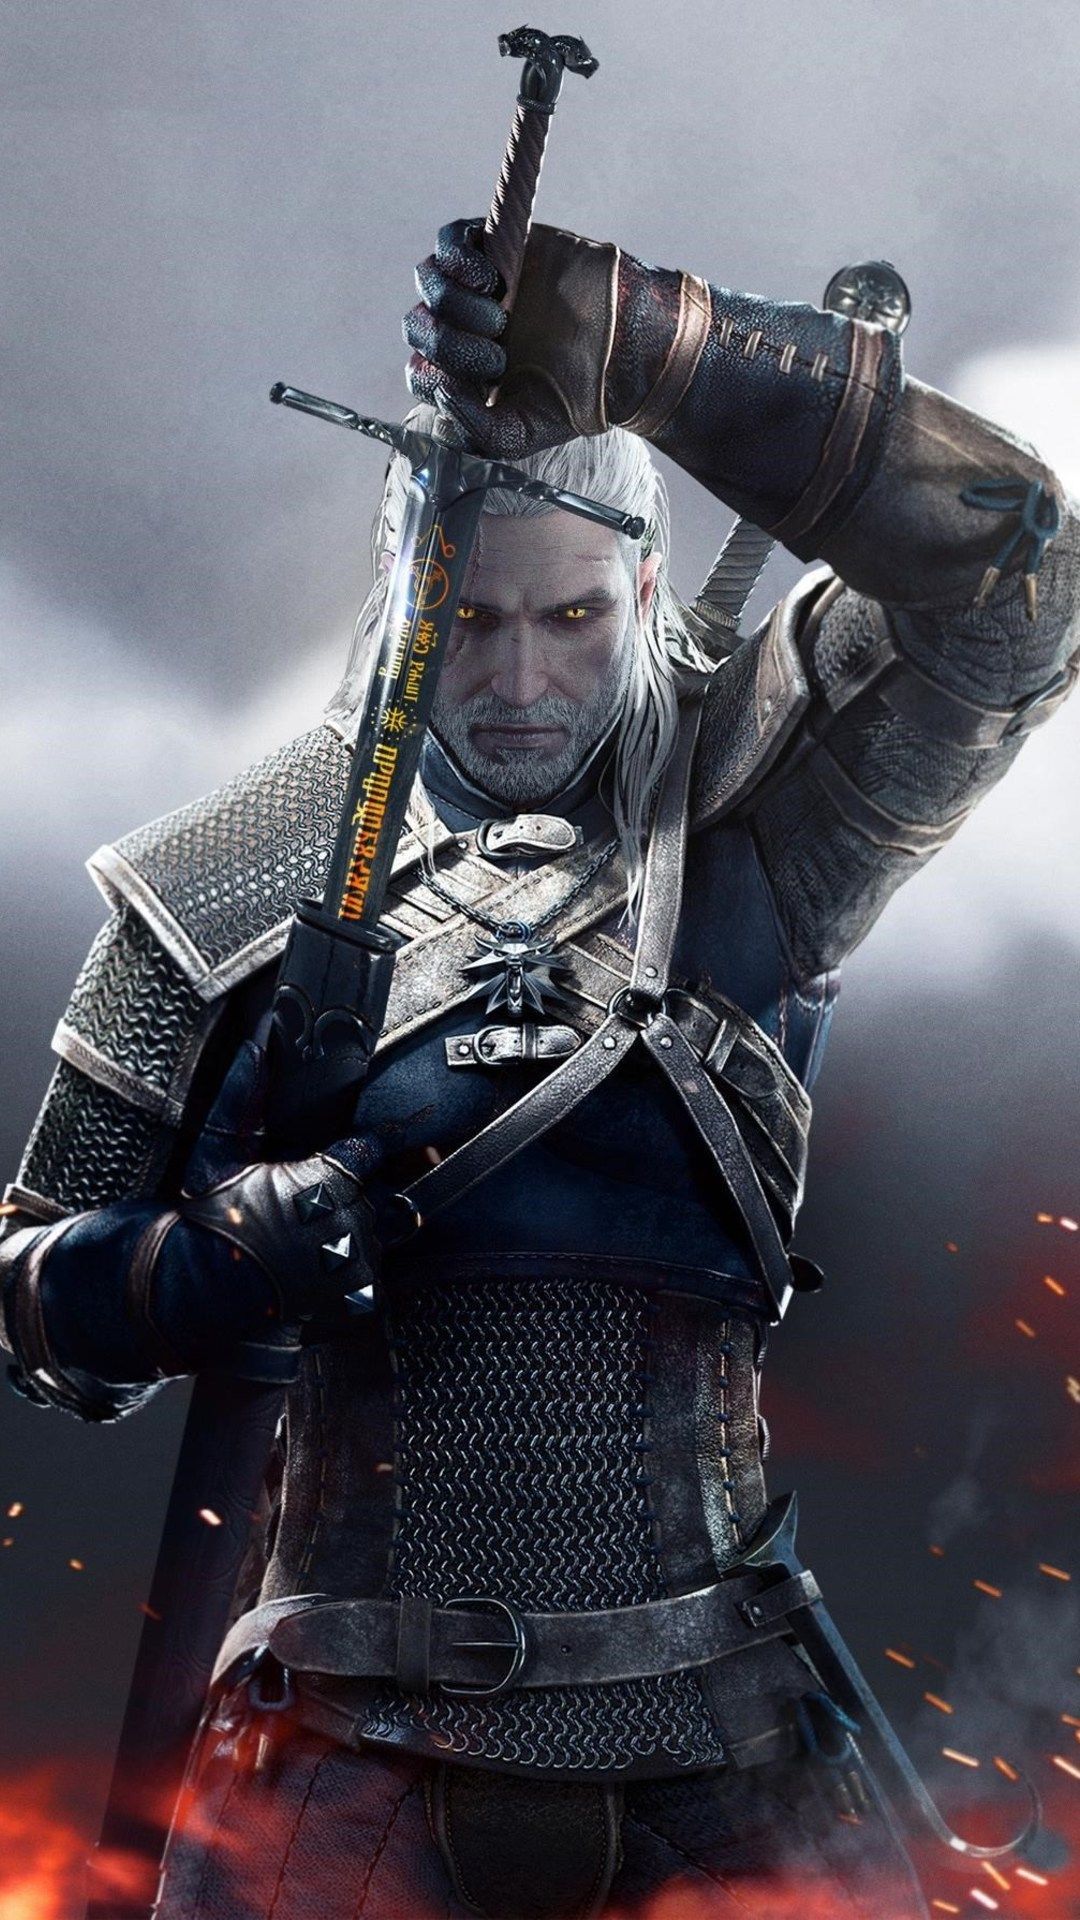 The Witcher 3 Wallpaper Hupages Download iPhone Wallpaper. The witcher game, The witcher, The witcher 3